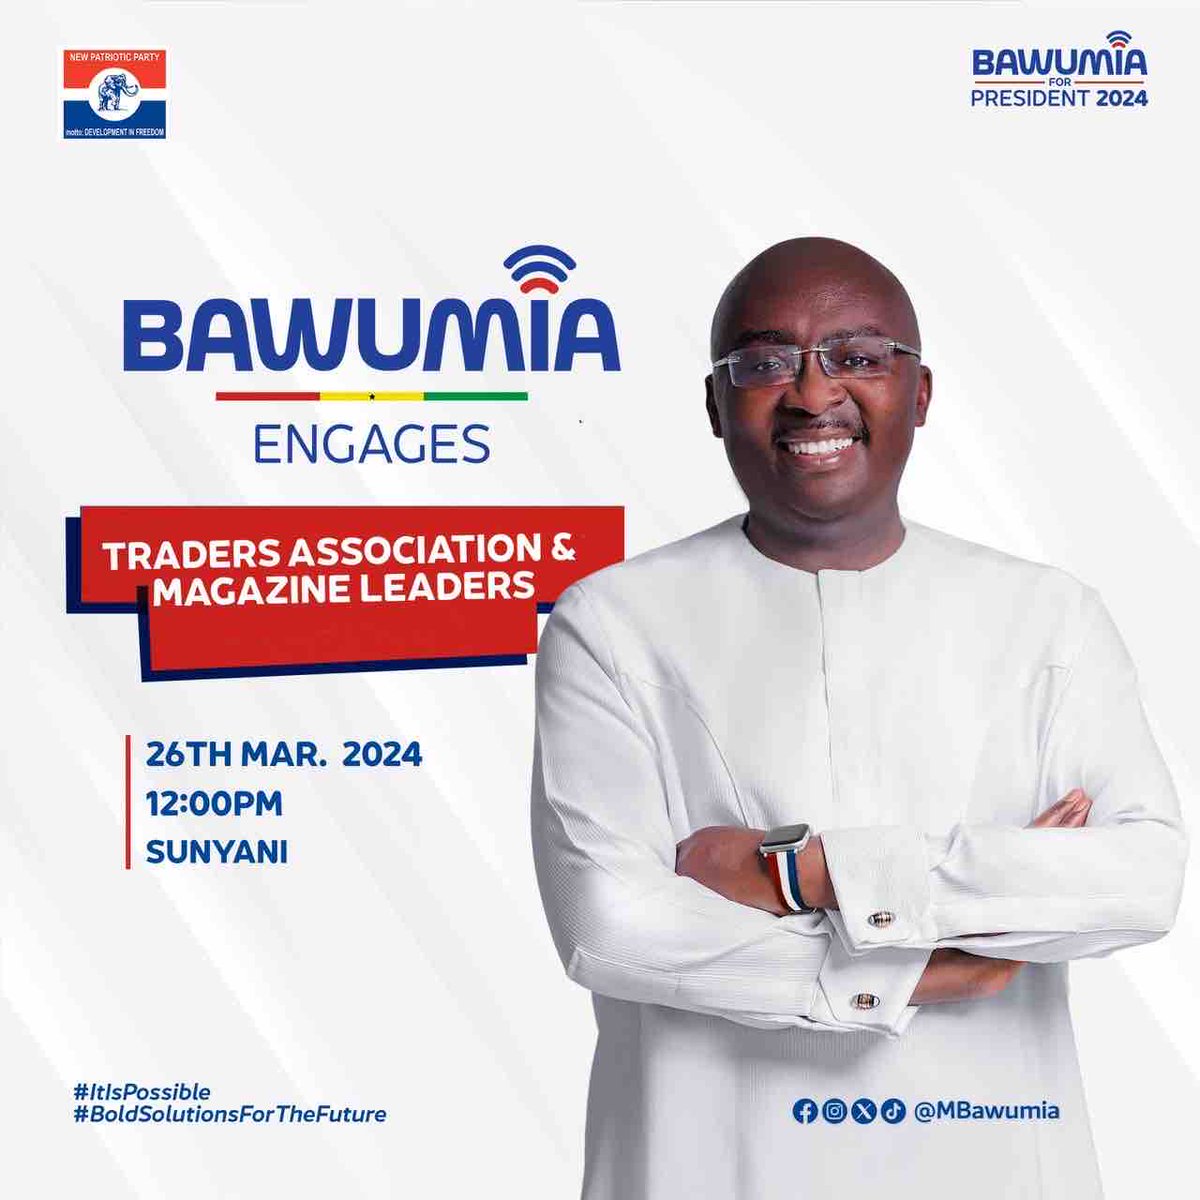 The 2024 NPP Presidential Candidate Dr. Mahamudu Bawumia will today meet with Traders in Sunyani, Bono Region to engage with them. #BoldSolutionsForOurFuture #GhanasNextChapter #Bawumia2024 #ItIsPossible #TaxAmnesty